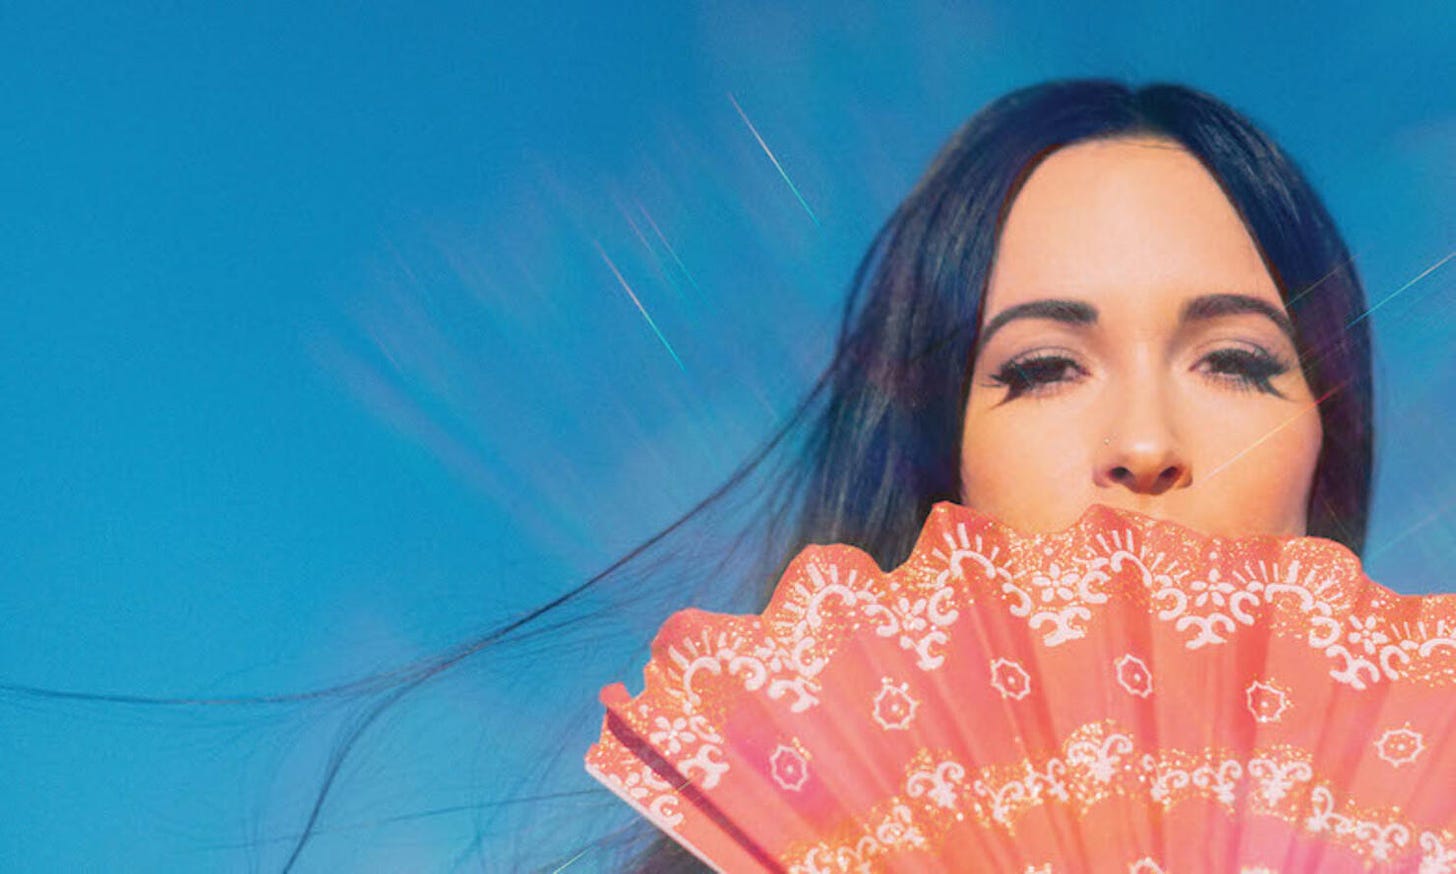 Kacey Musgraves on 'Golden Hour,' Recording At Sheryl Crow's Studio & More  | iHeart